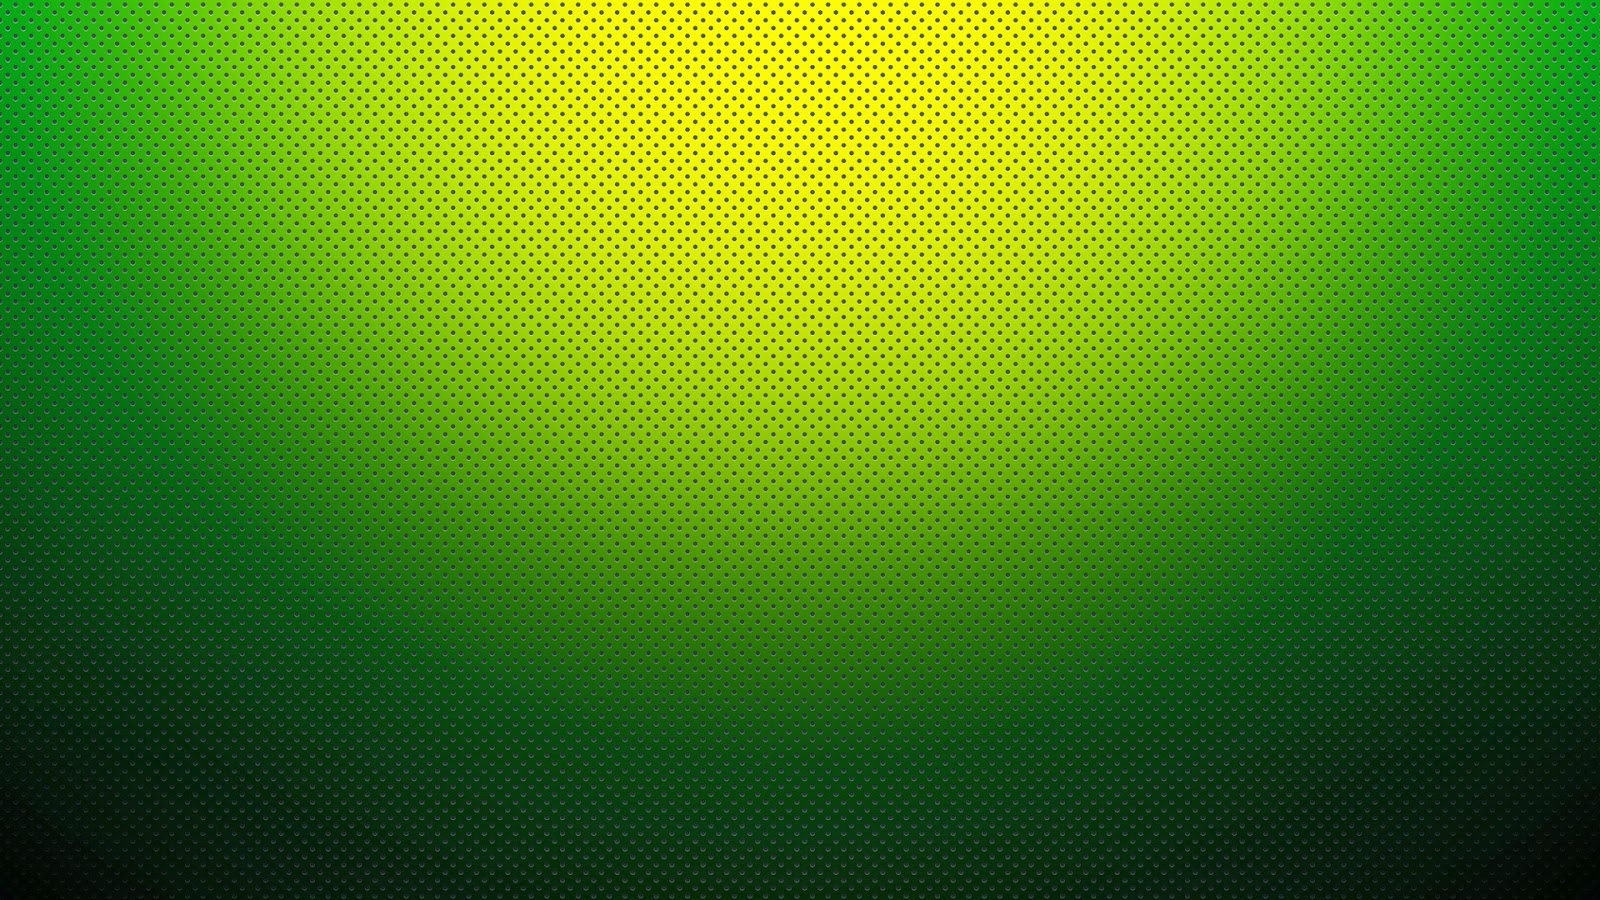 Greenyellow gradient design pattern background images photoshop PSD